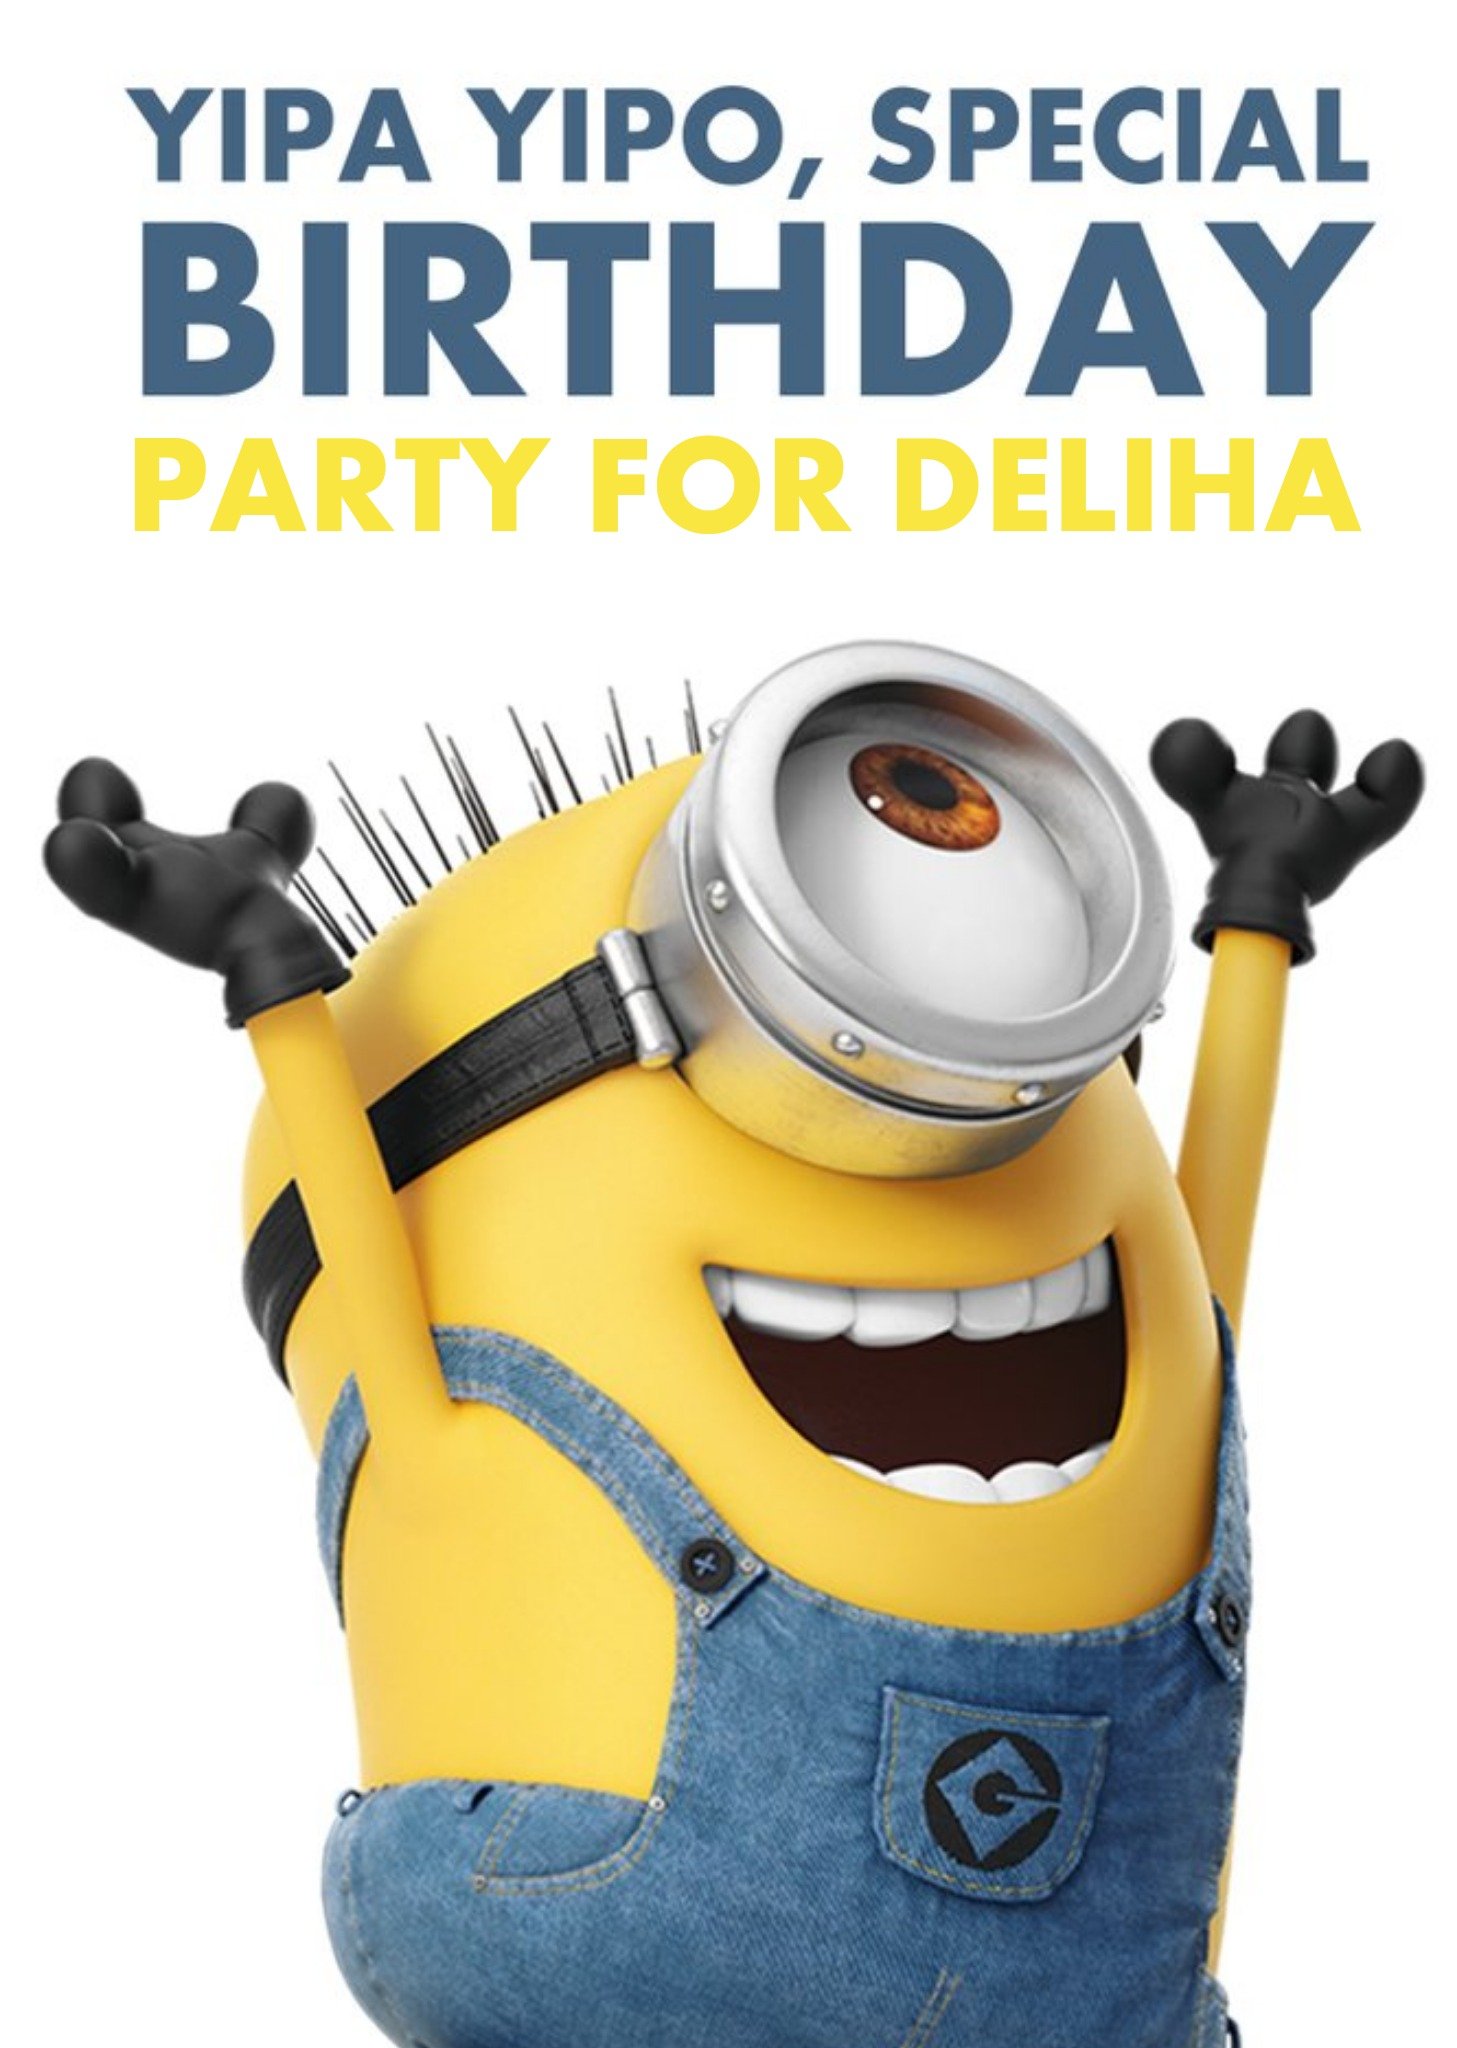 Despicable Me The Minions Yipa Yipo Personalised Birthday Party Invitation, Standard Card